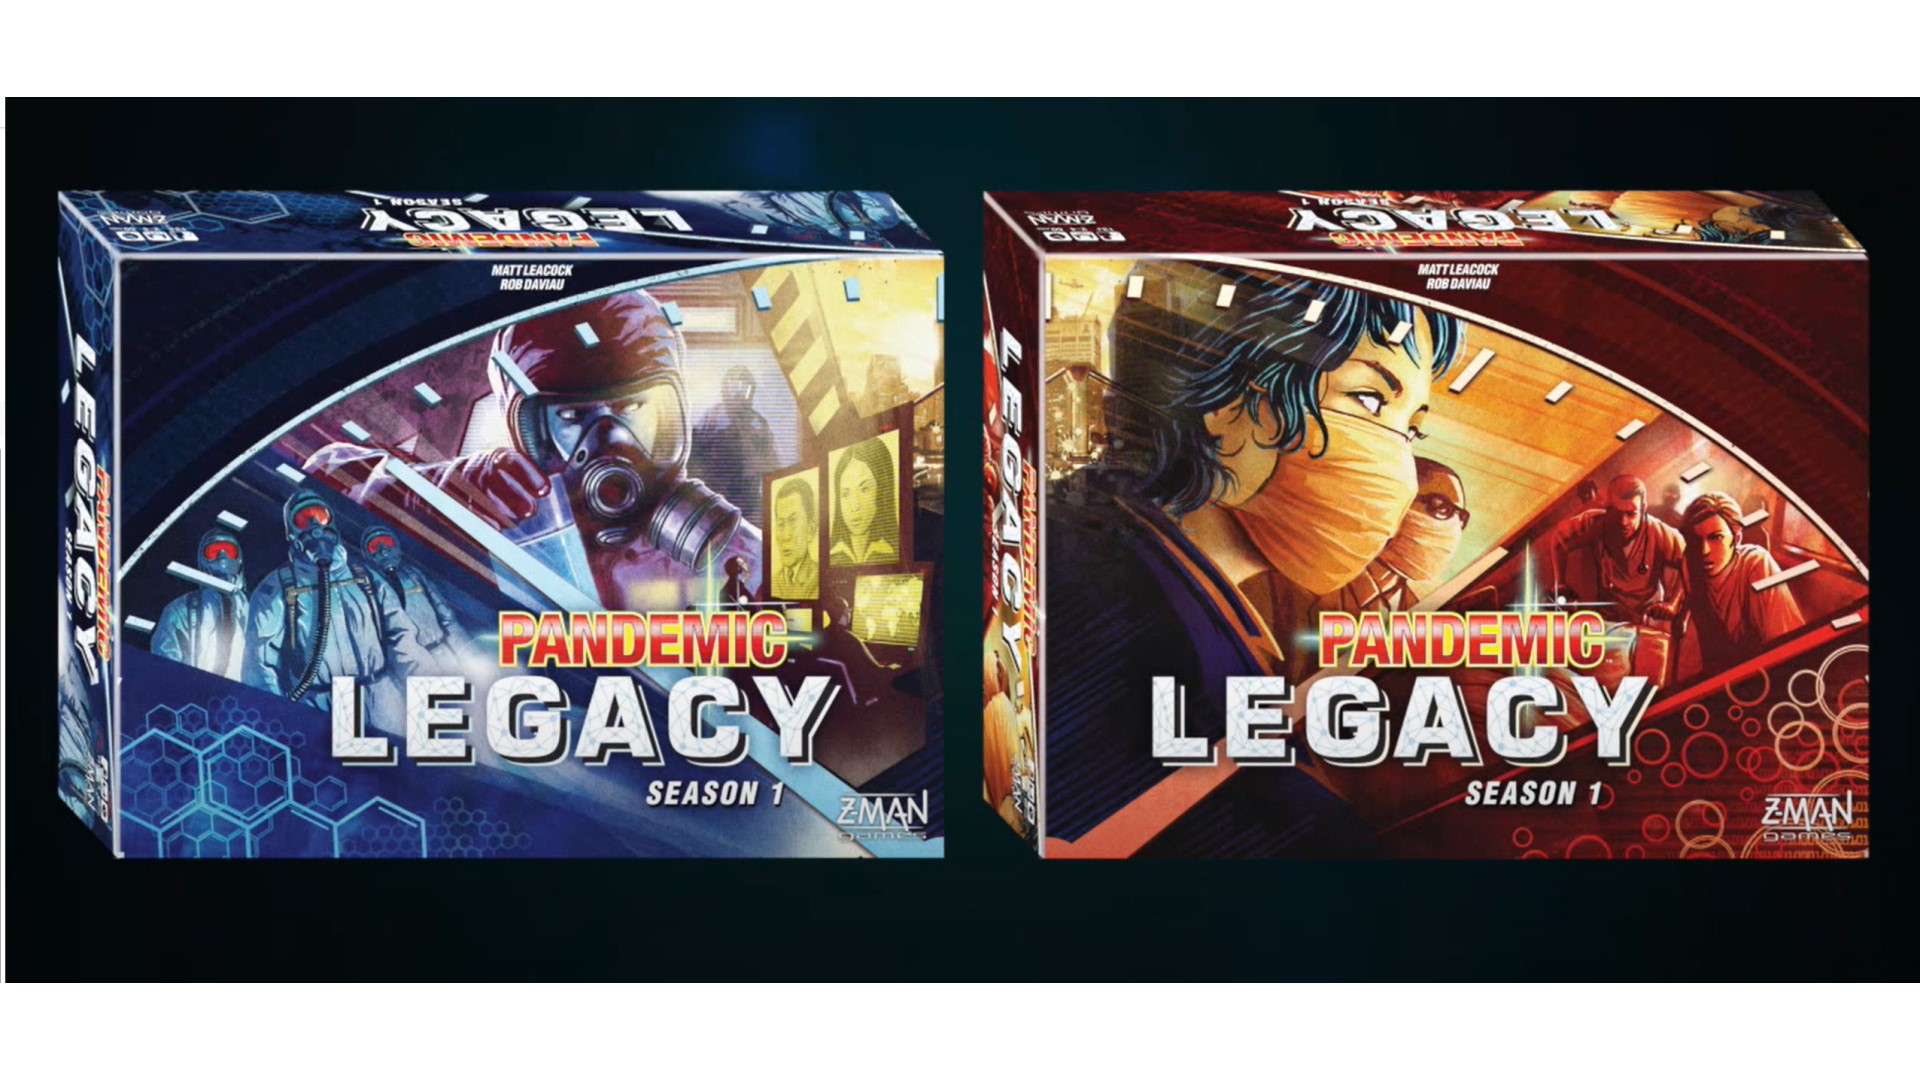 Legacy board games - Pandemic Legacy: Season 1 red and blue boxes